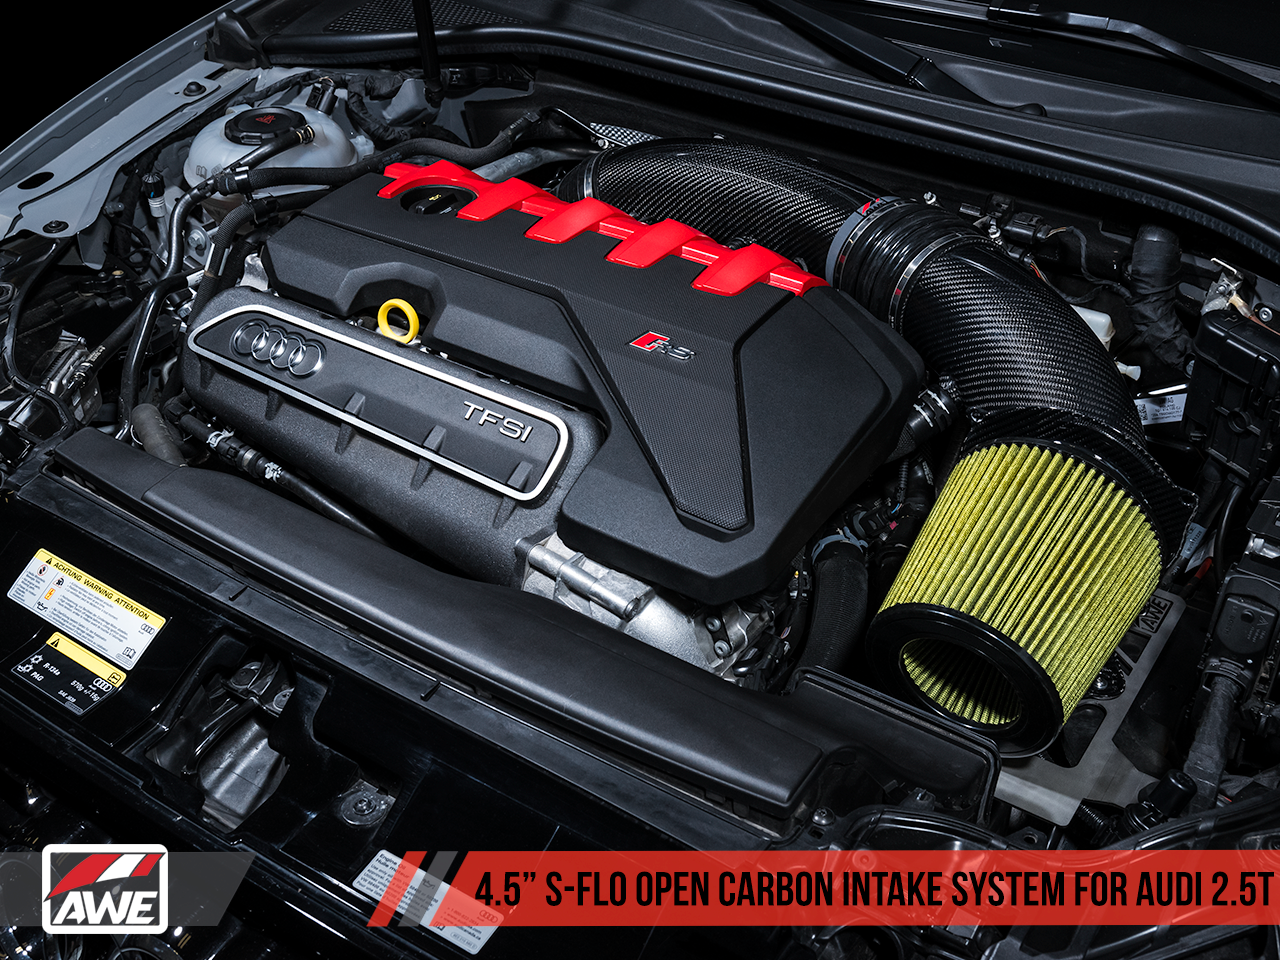 AWE 4.5" S-FLO Open Carbon Intake System for Audi RS 3 / TT RS - 0